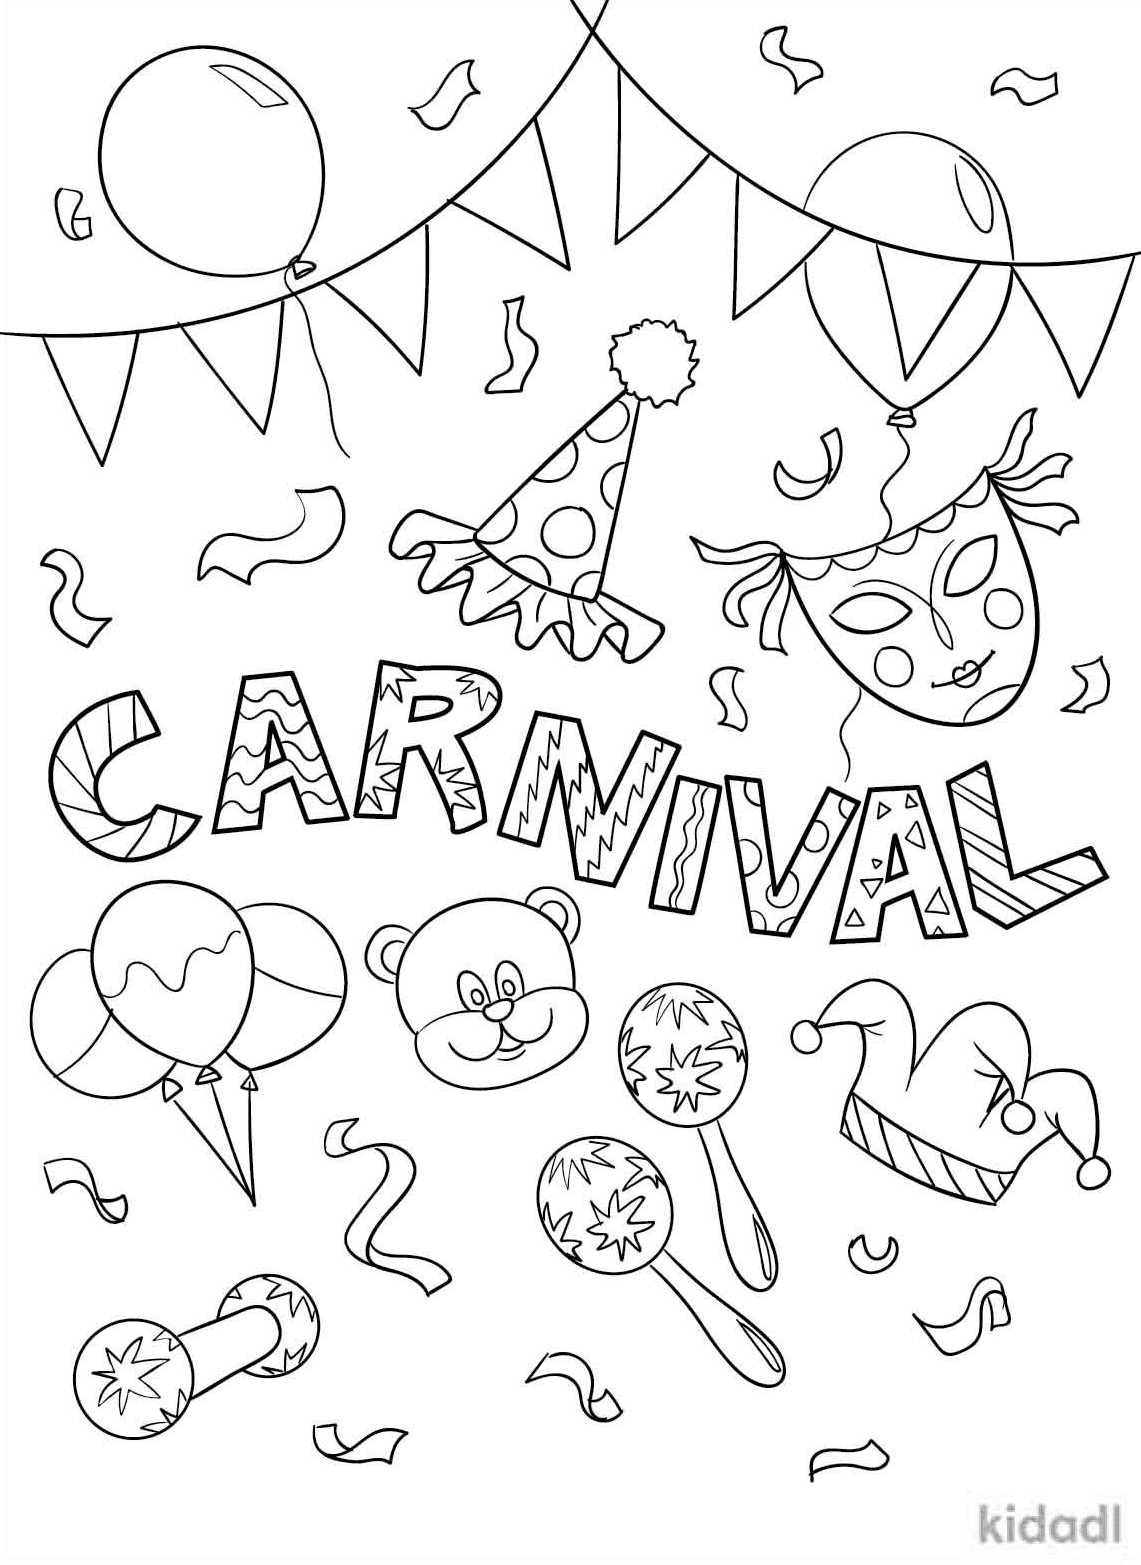 carnival-free-printable-coloring-pages-free-printable-coloring-pages